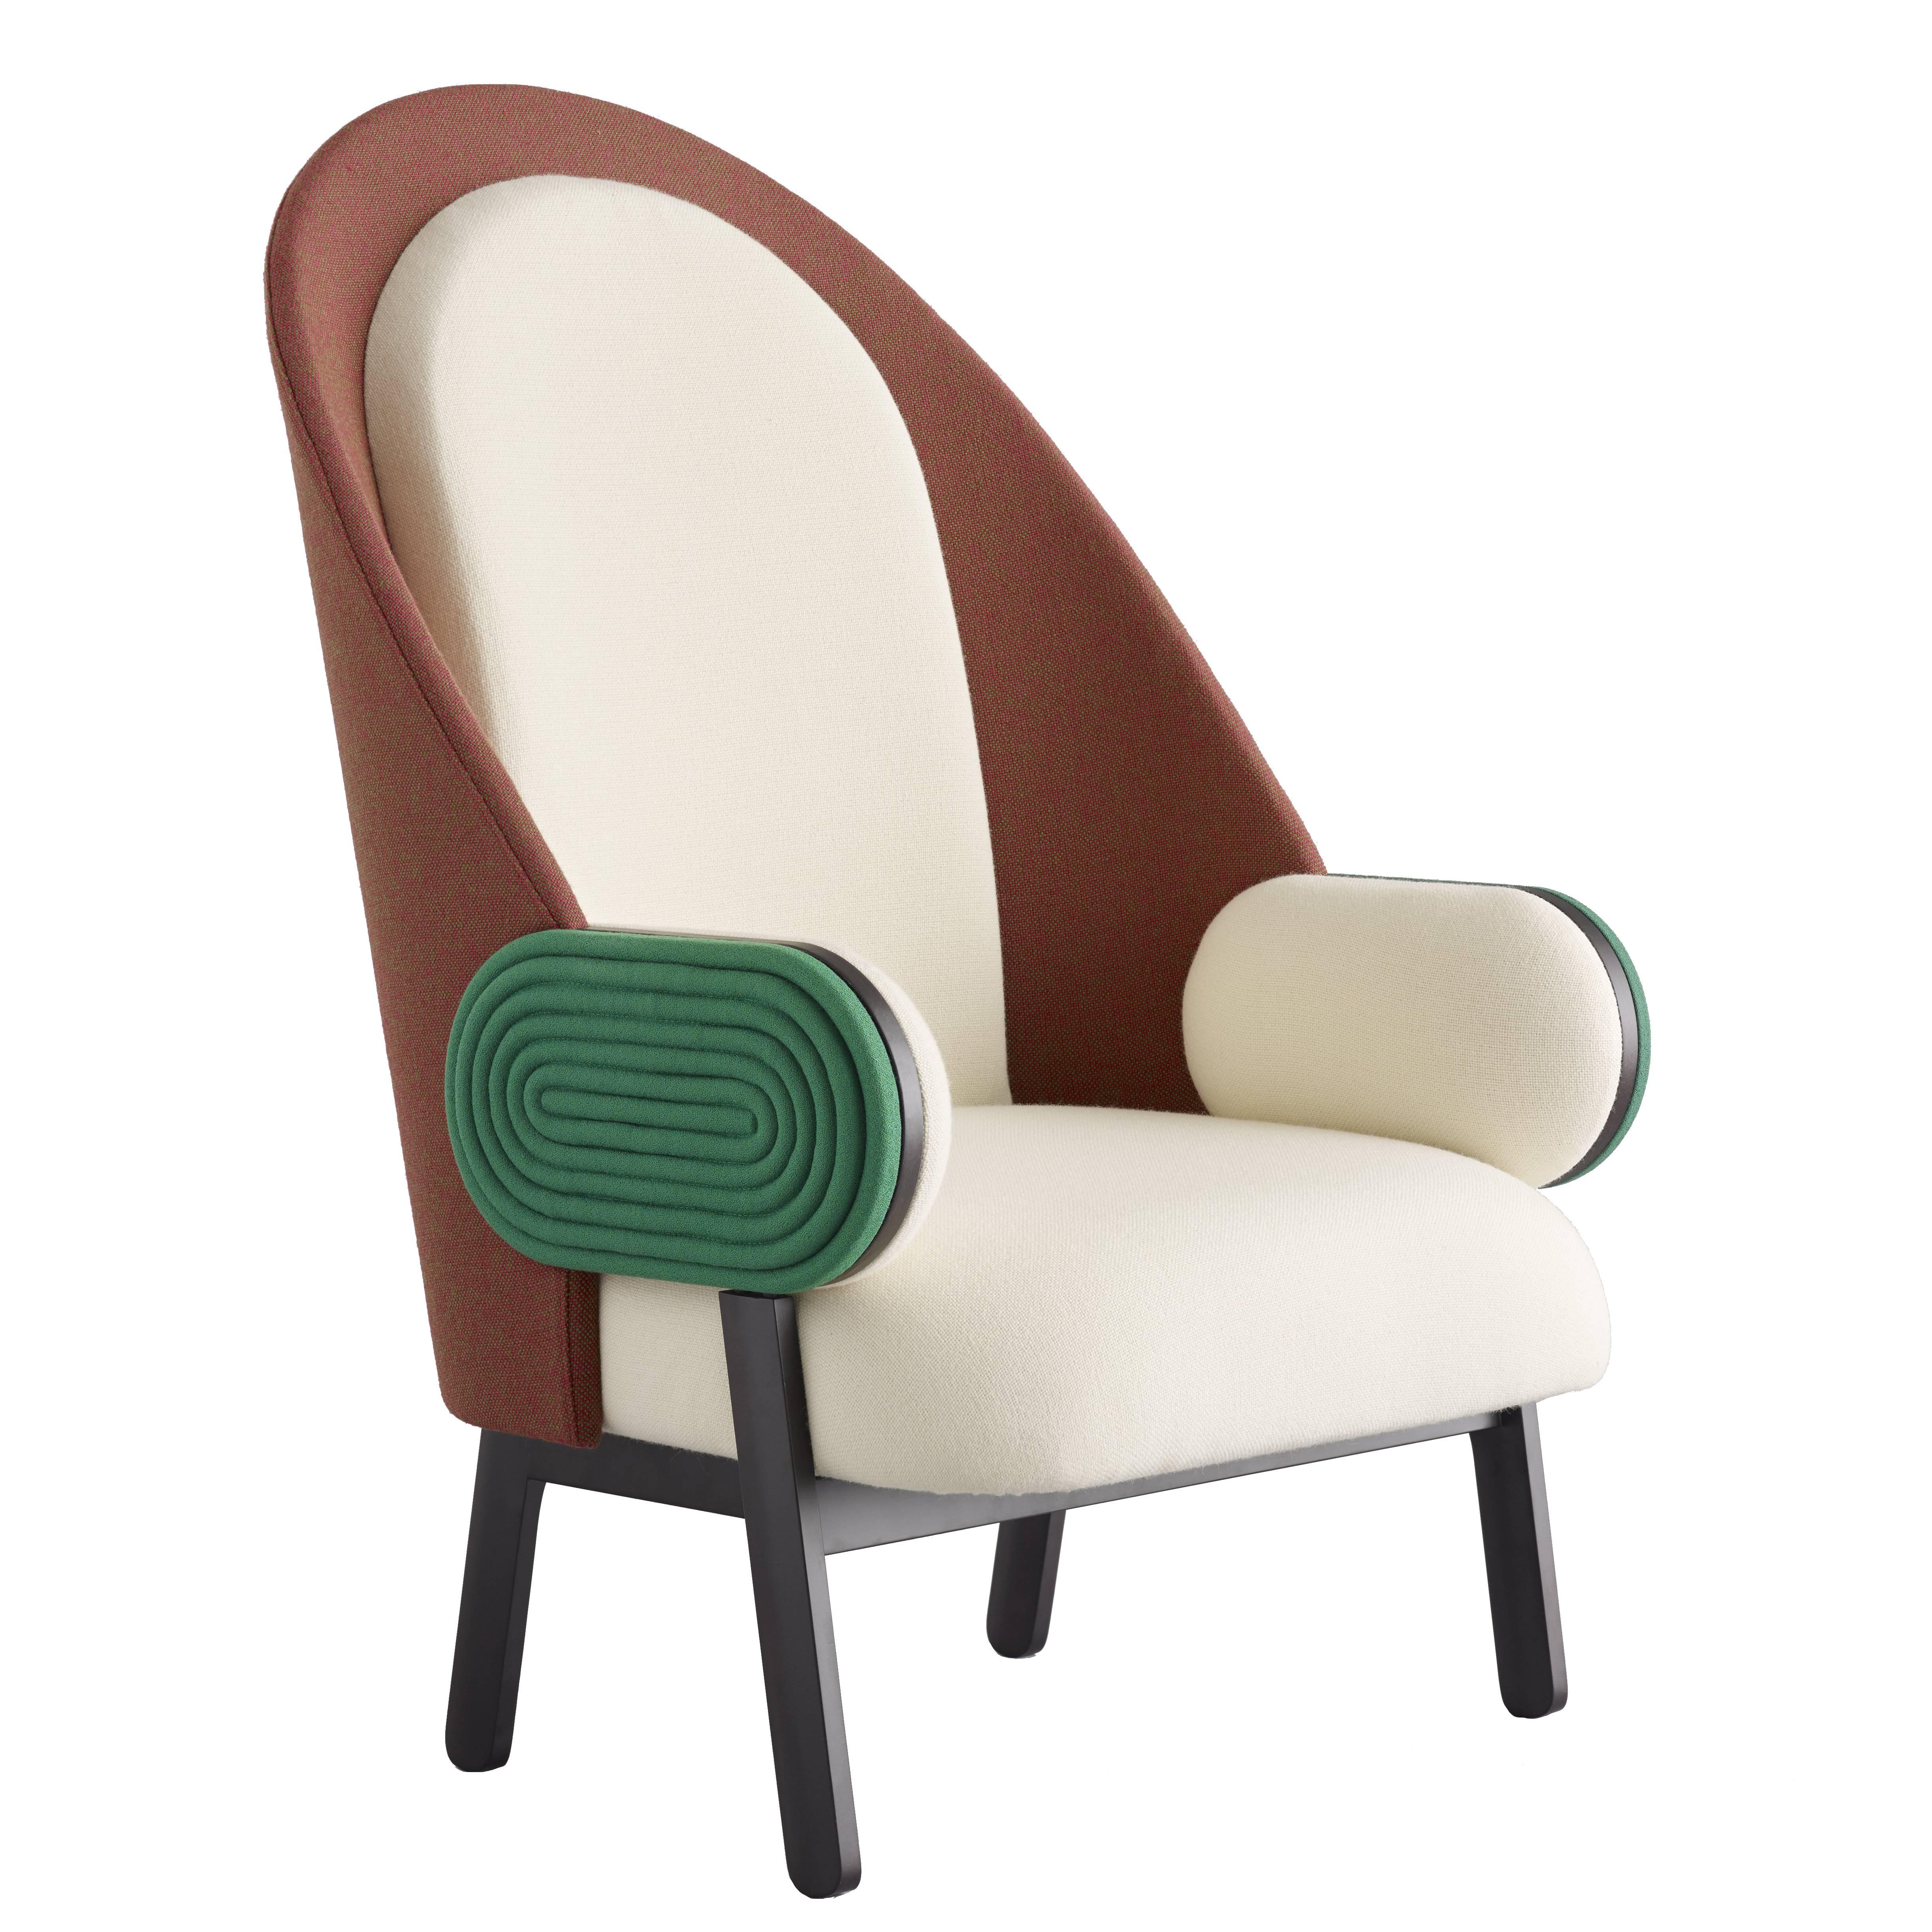 ‘MOON-B', a Contemporary Armchair with a Vintage Twist in Limited Edition